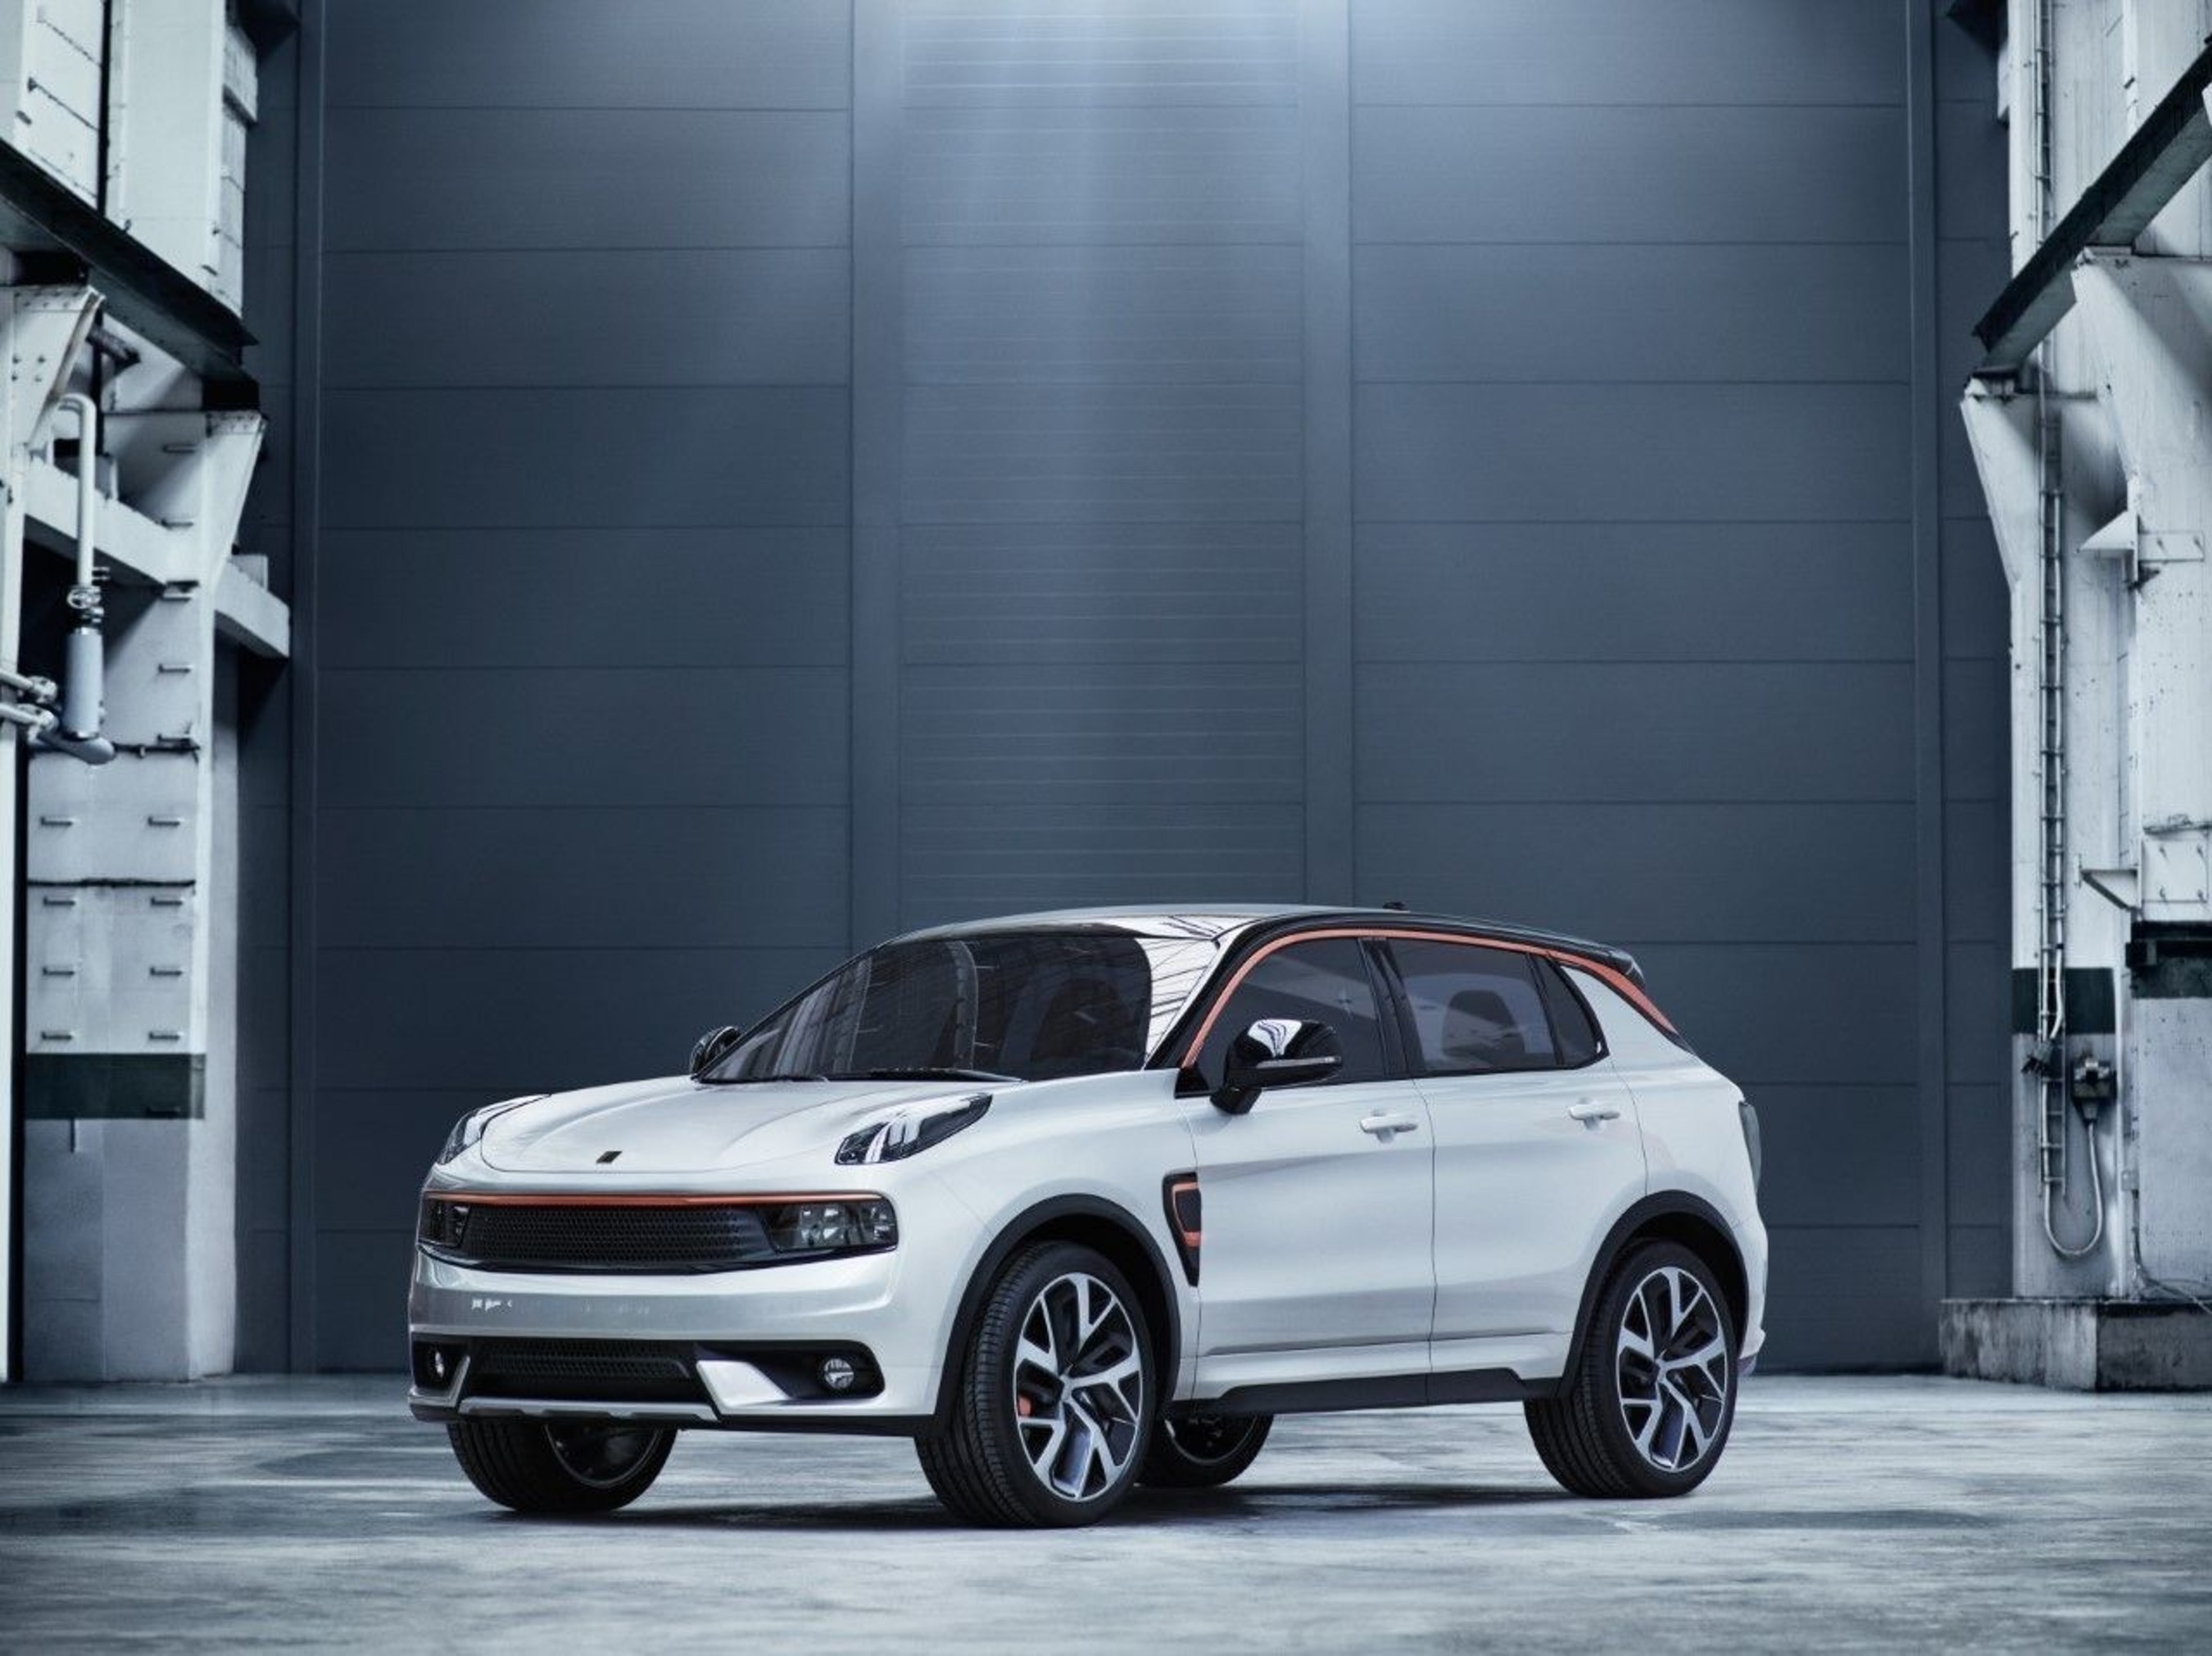 LYNK & CO is a new brand with the ambition to challenge the conventions of the automobile industry, addressing the needs and preferences of the new global and connected generation. Creating new ways of owning and using a car, with built-in sharing functionality and ownership solutions.